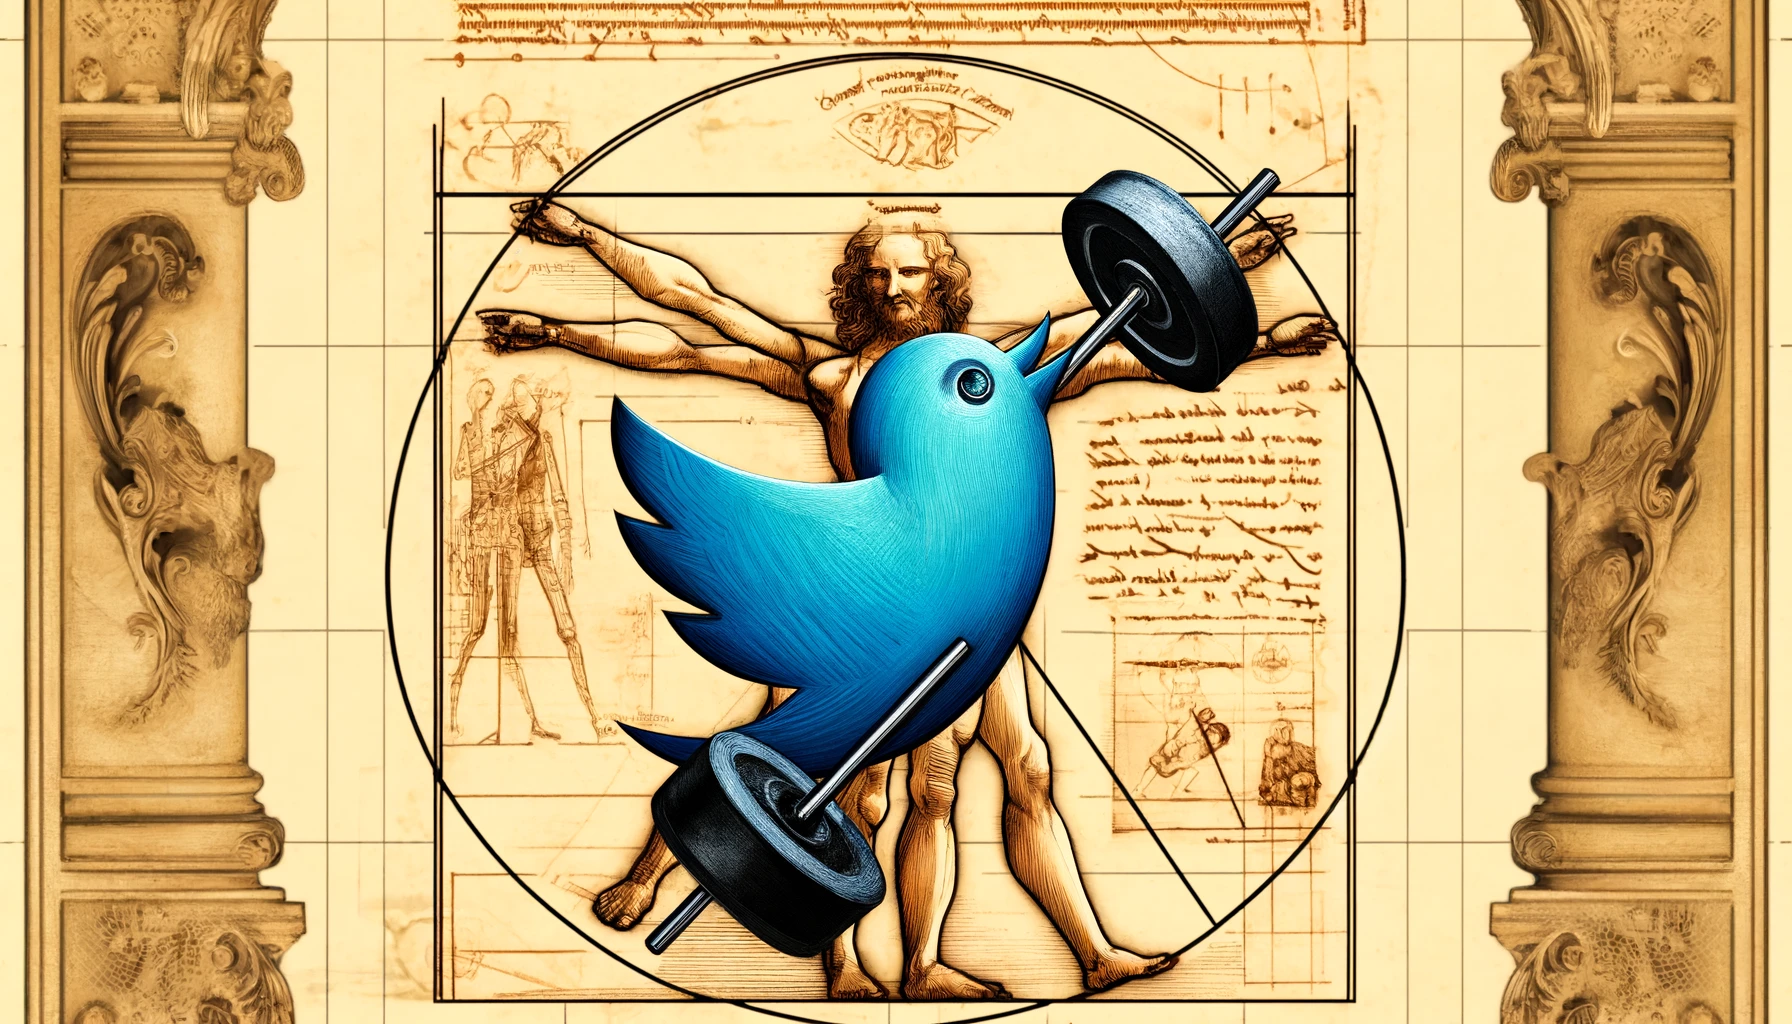 A-depiction-of-the-Twitter-logo-in-a-Da-Vinci-styled-theme-lifting-weights.